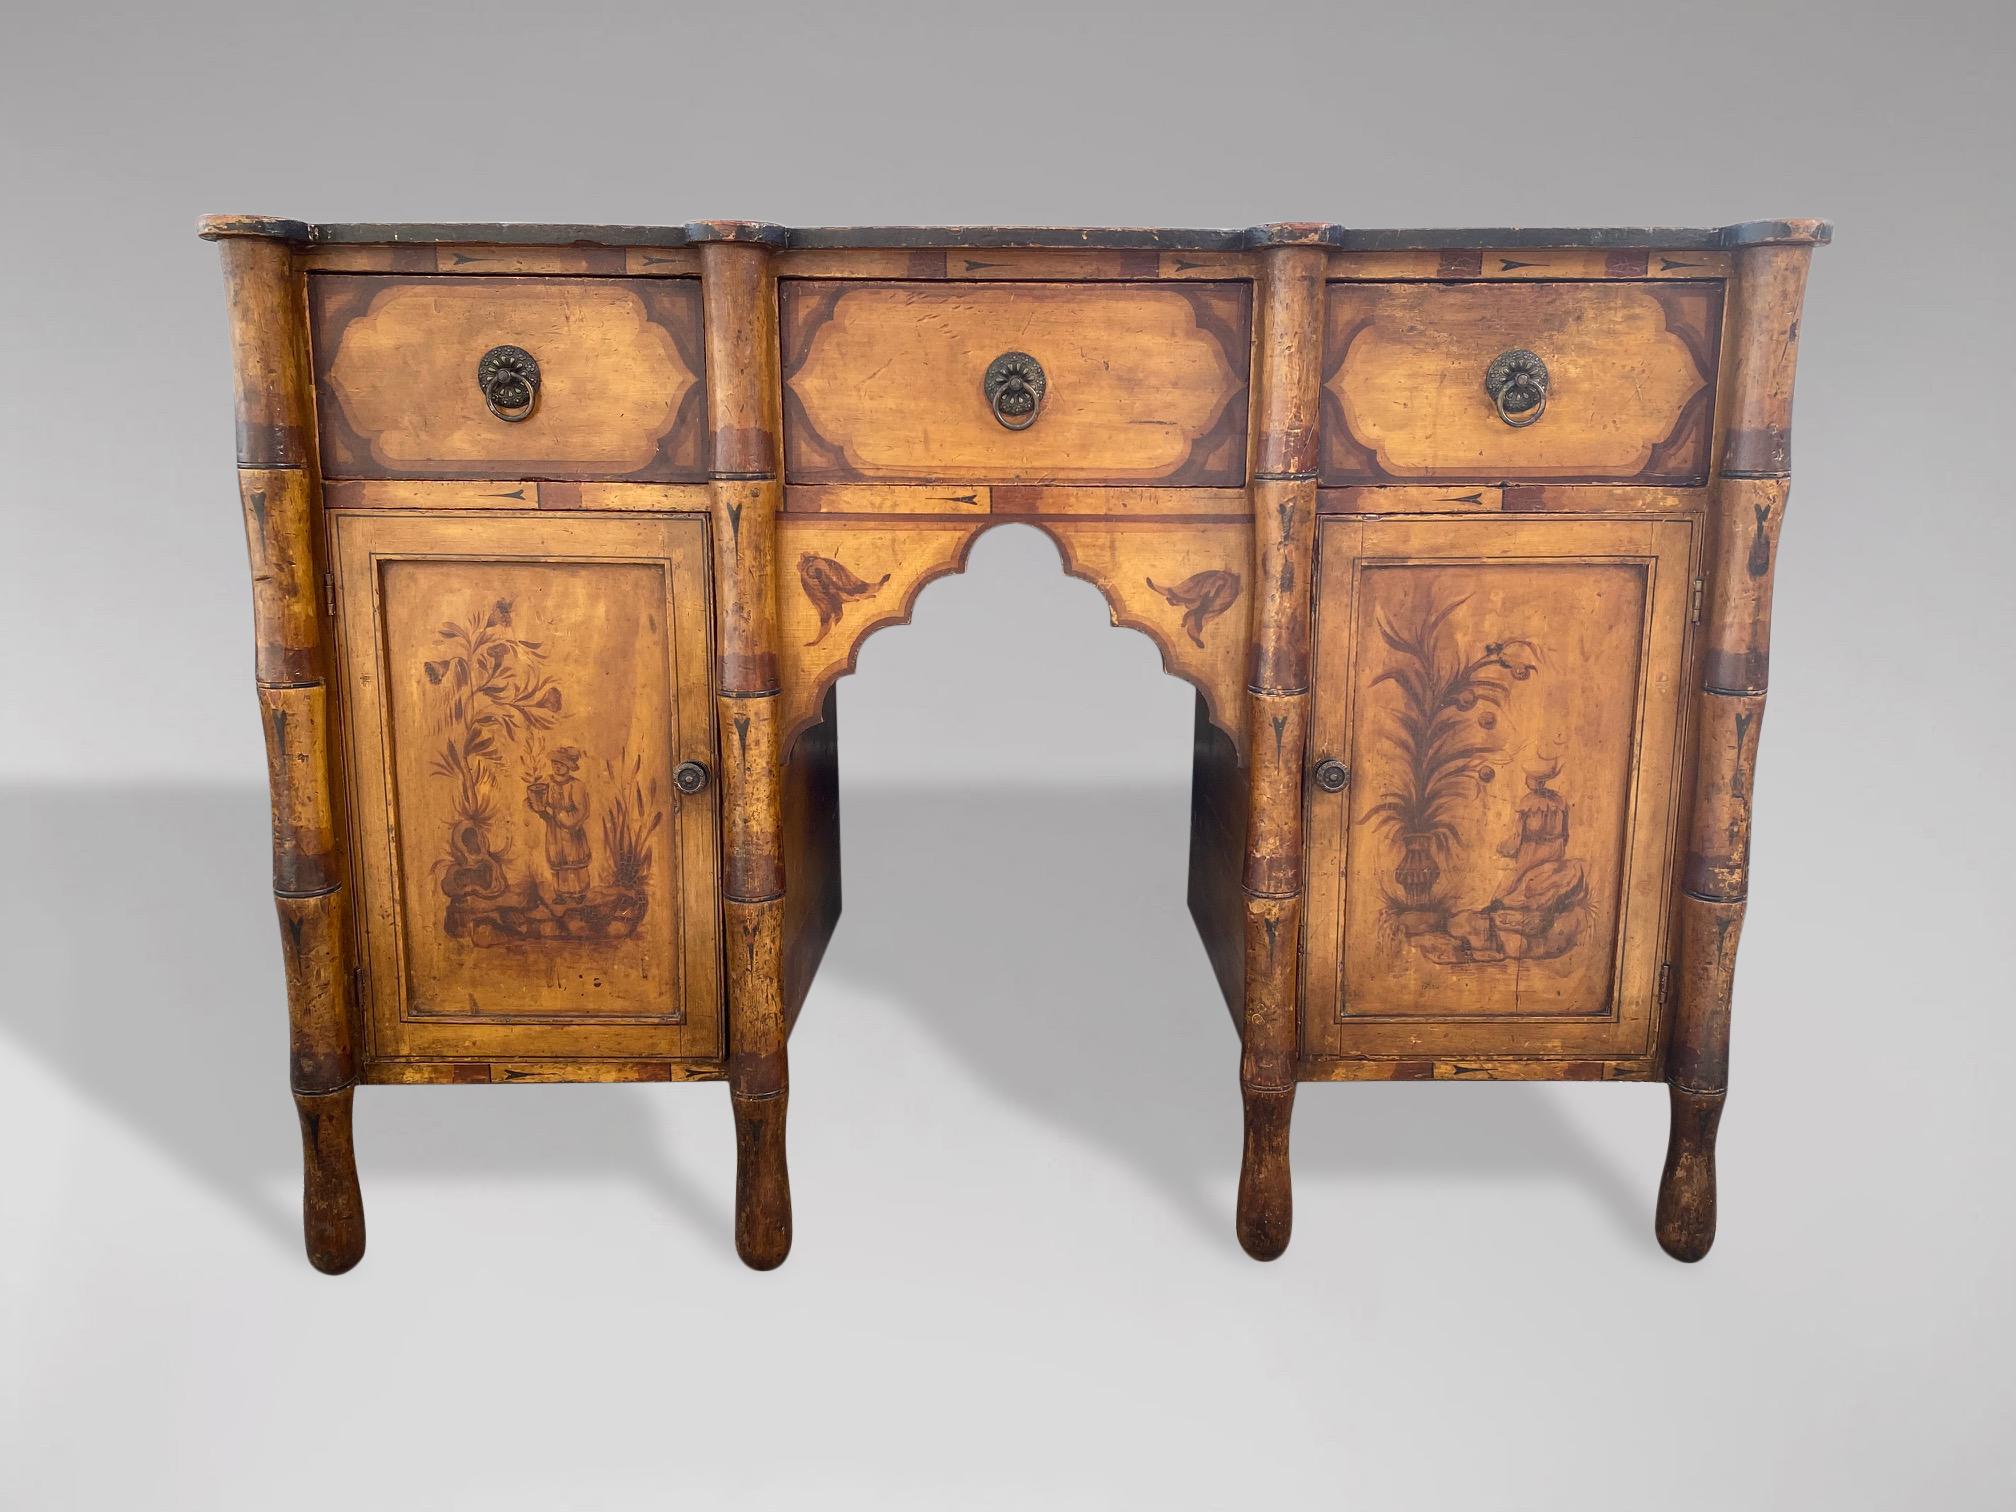 A rare late 19th century French faux bamboo dresser with original paint and drawings. This 19th century French dresser or sideboard featuring a faux bamboo frame. Rectangular shaped top above three fine dovetailed drawers accented by carved brass